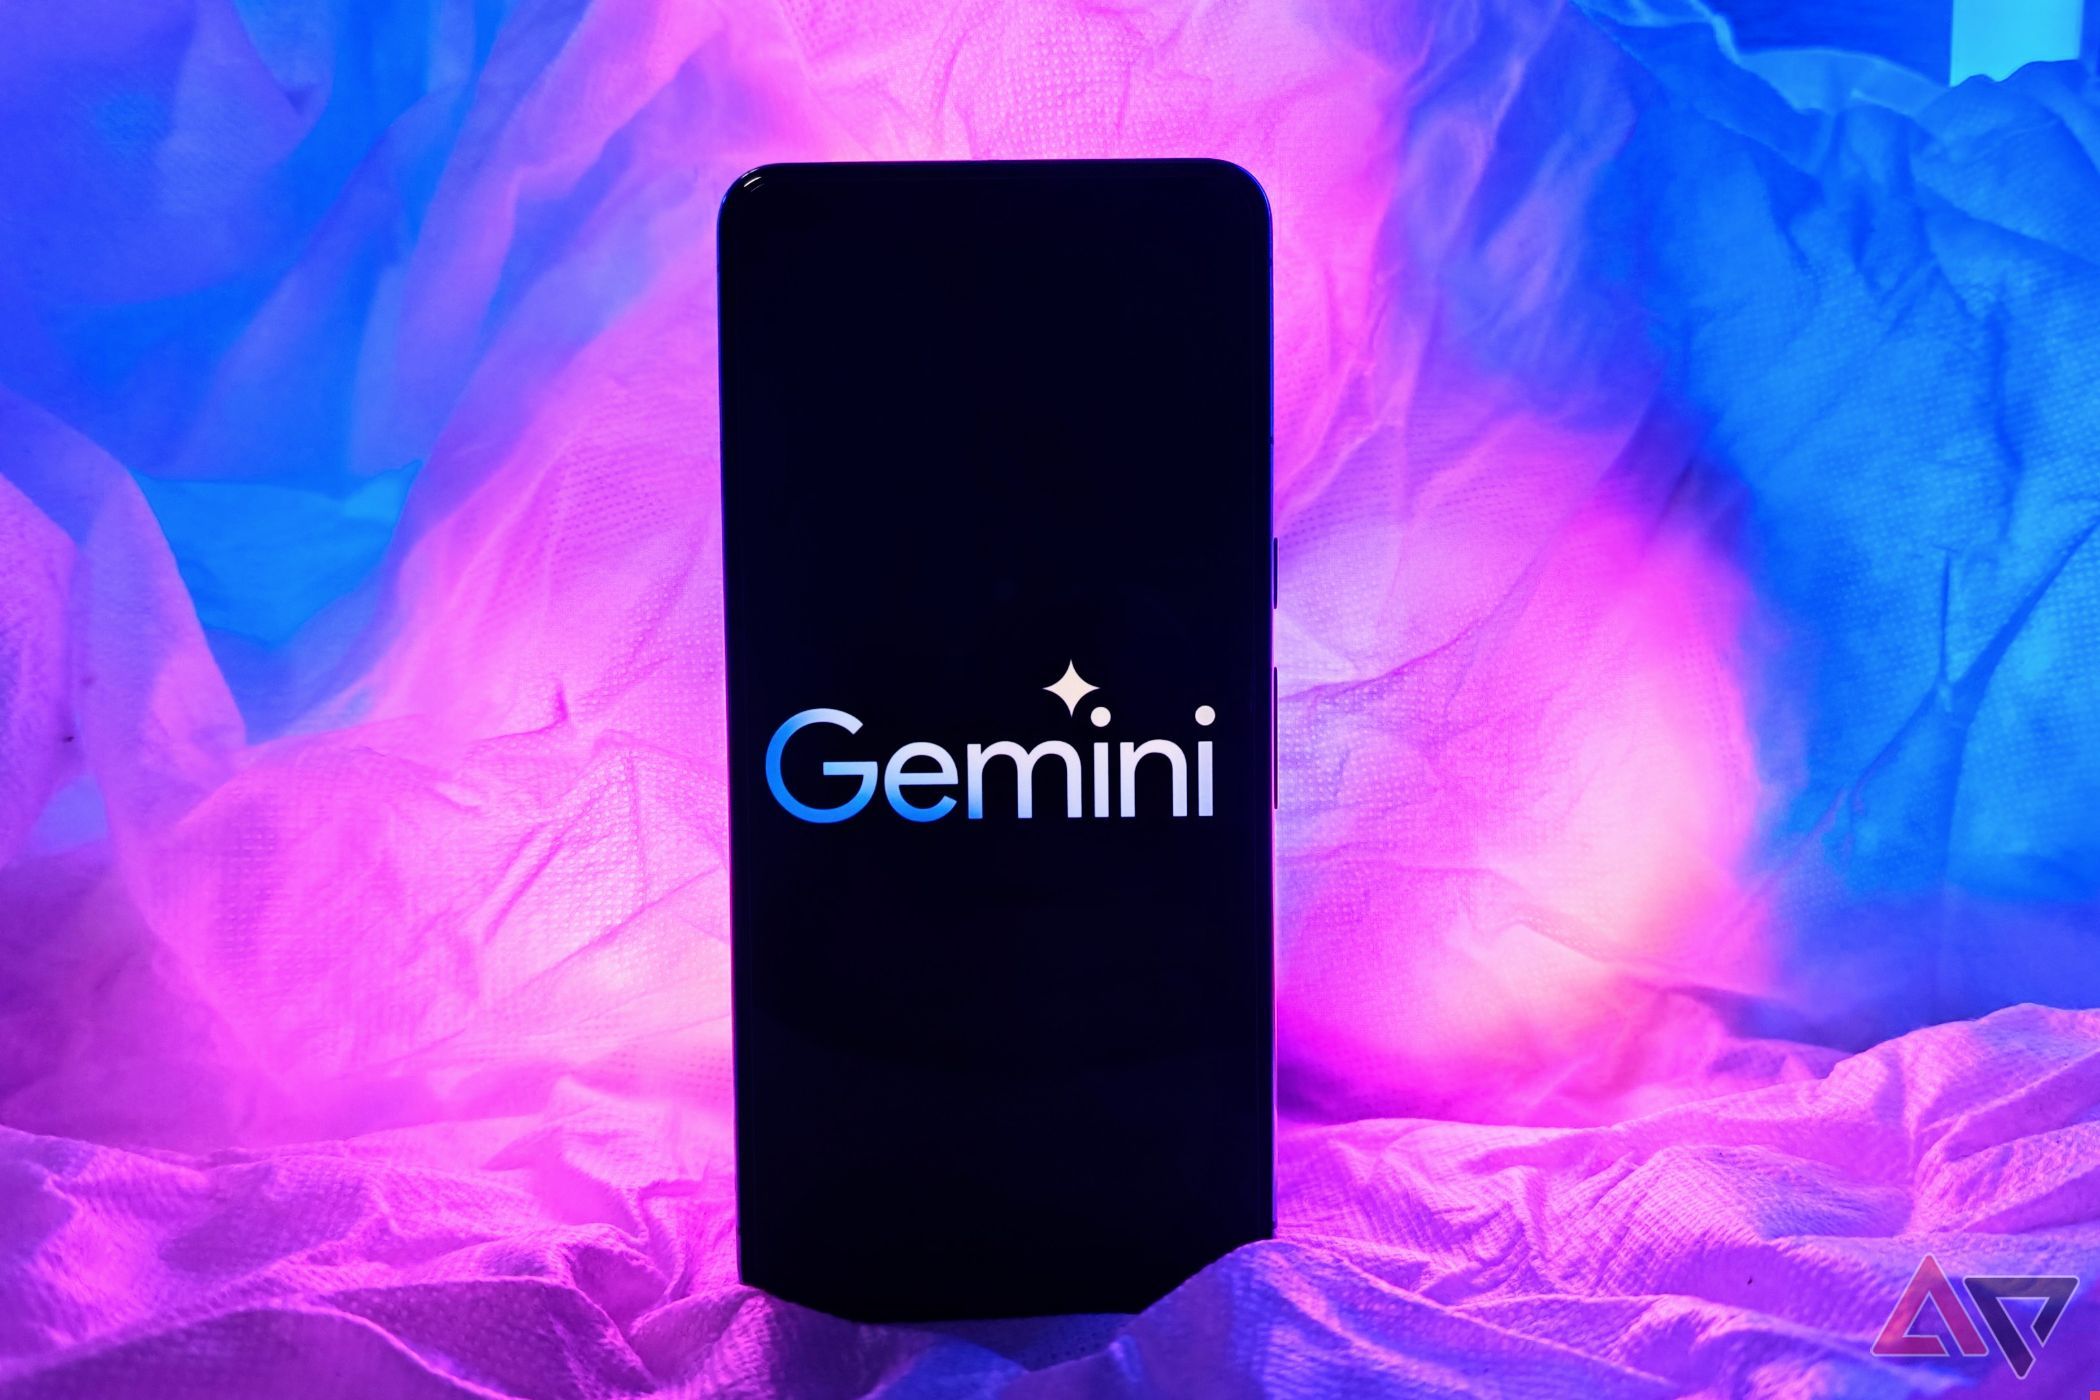 Get Ready for Gemini: Google Assistant’s Futuristic Personality Feature Set to Revolutionize Virtual Assistance